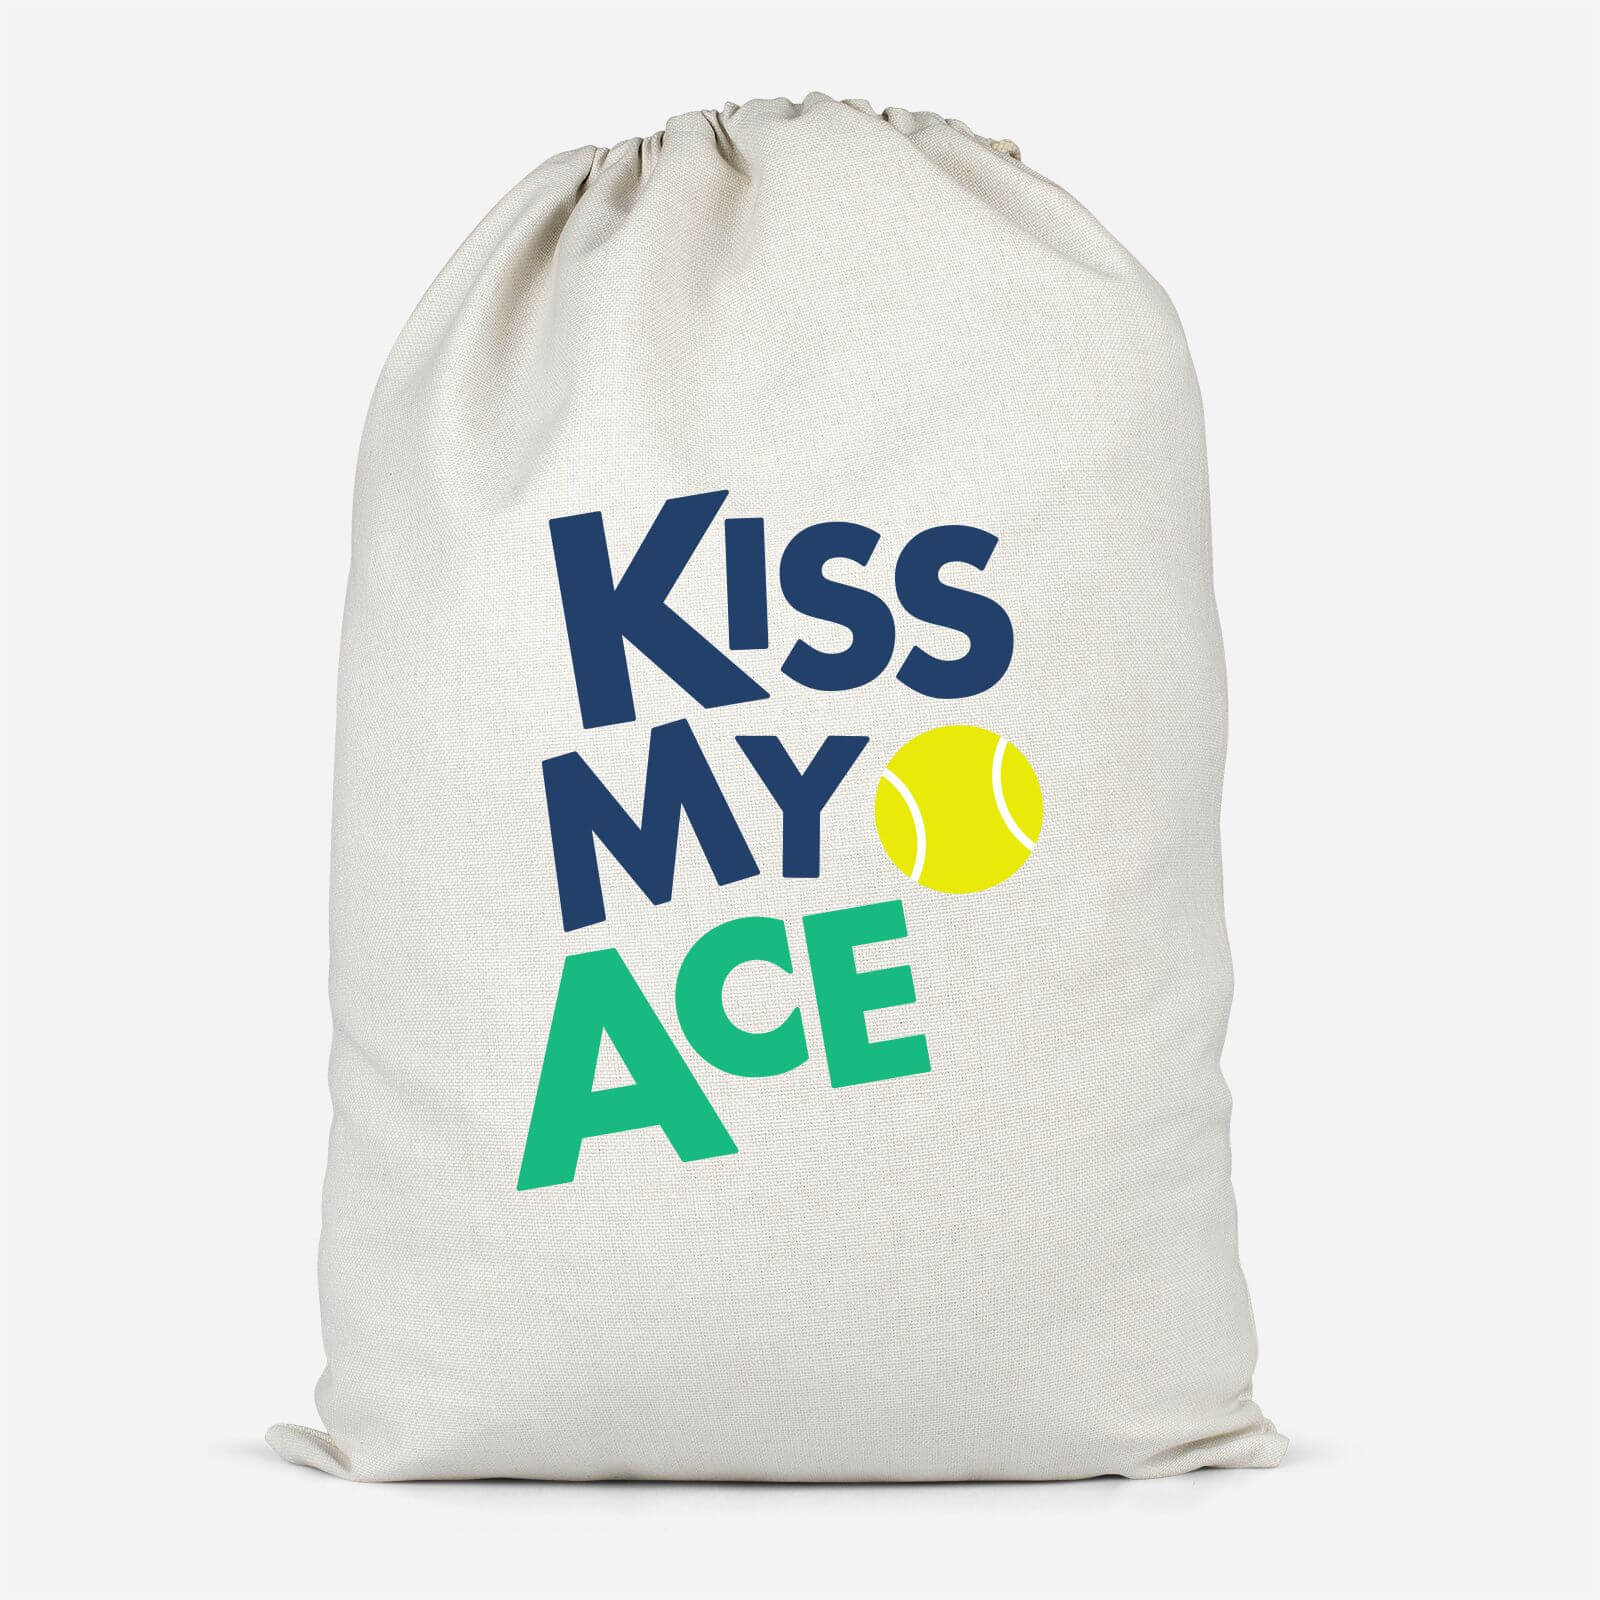 Kiss My Ace Cotton Storage Bag   Small